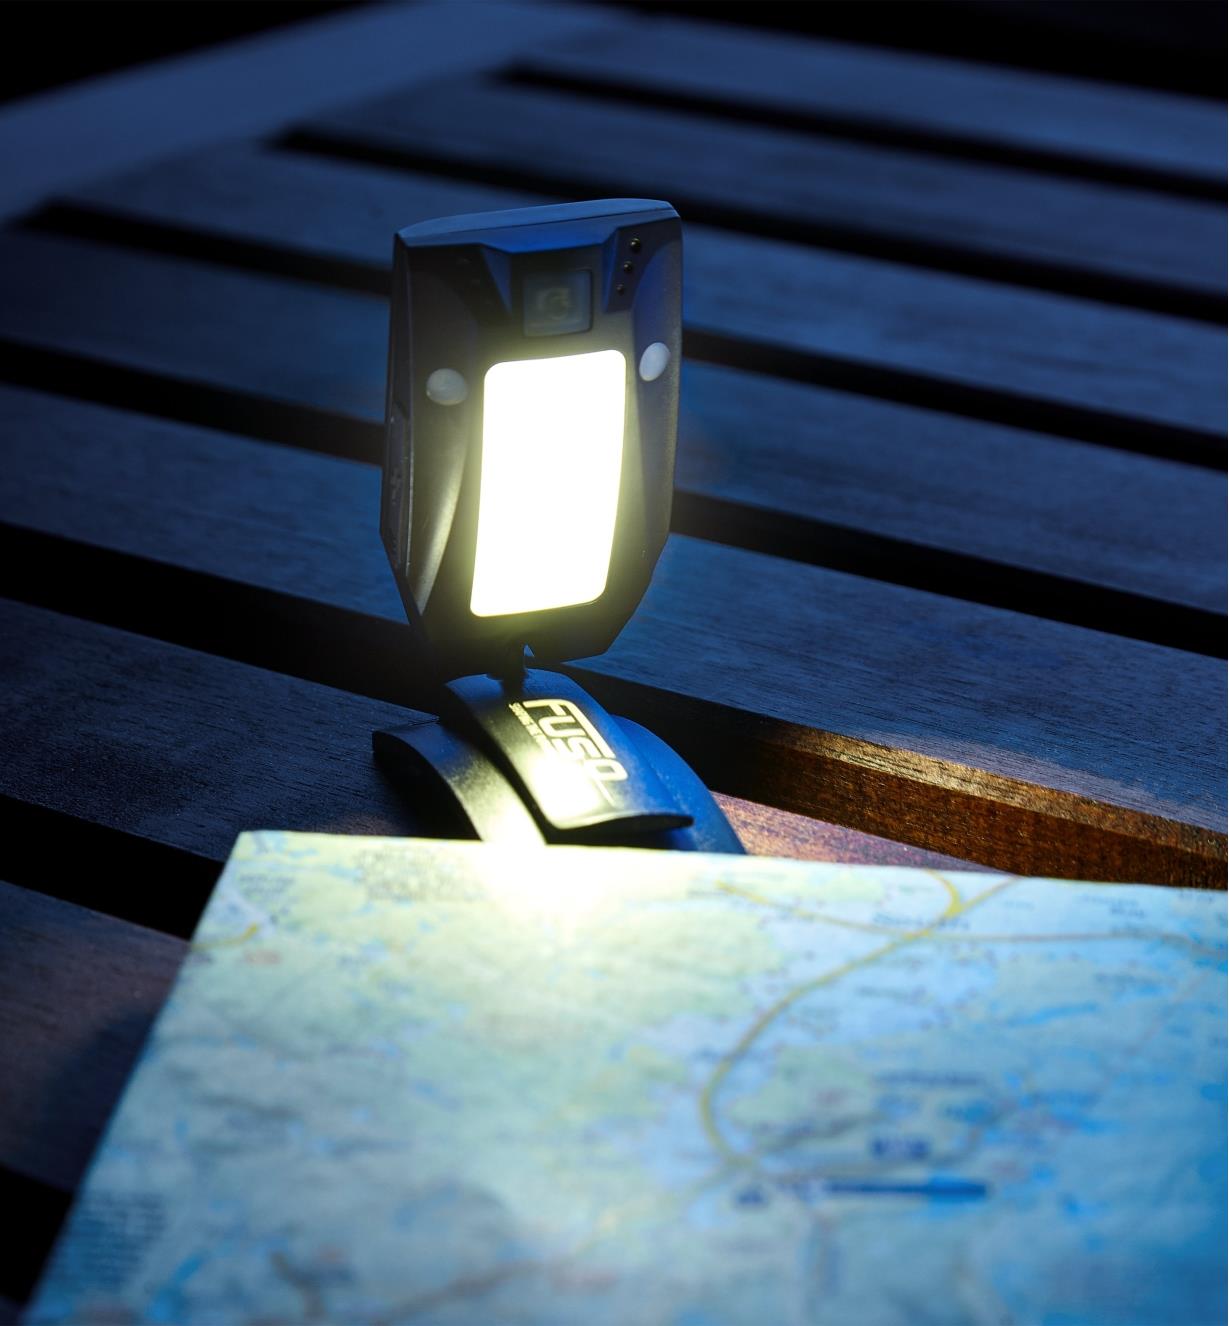 Detached from the band, the base of the multi-function LED headlamp is used freestanding